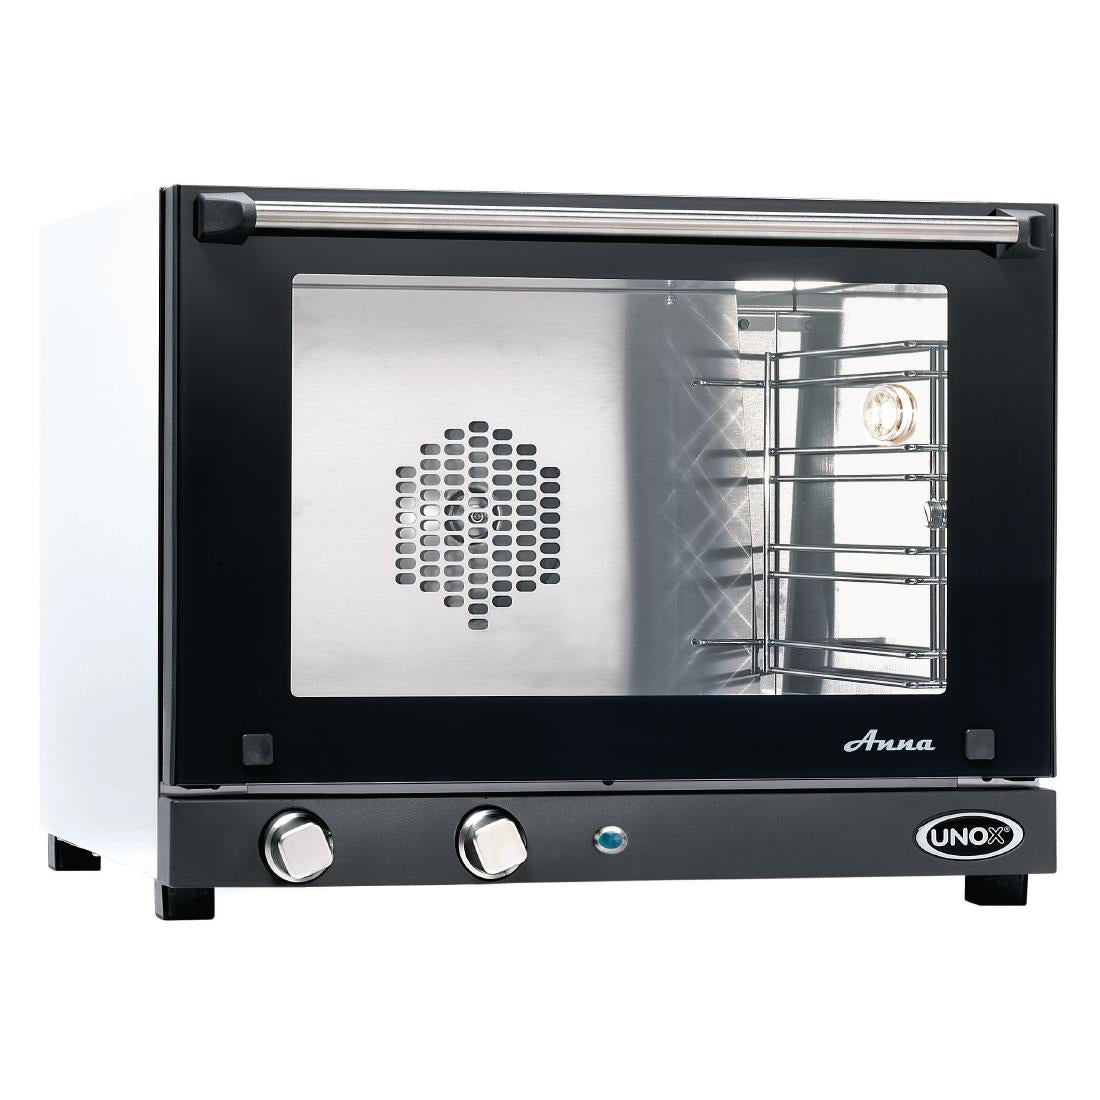 DR727 Unox LINEMICRO Anna 4 Grid Convection Oven XF023